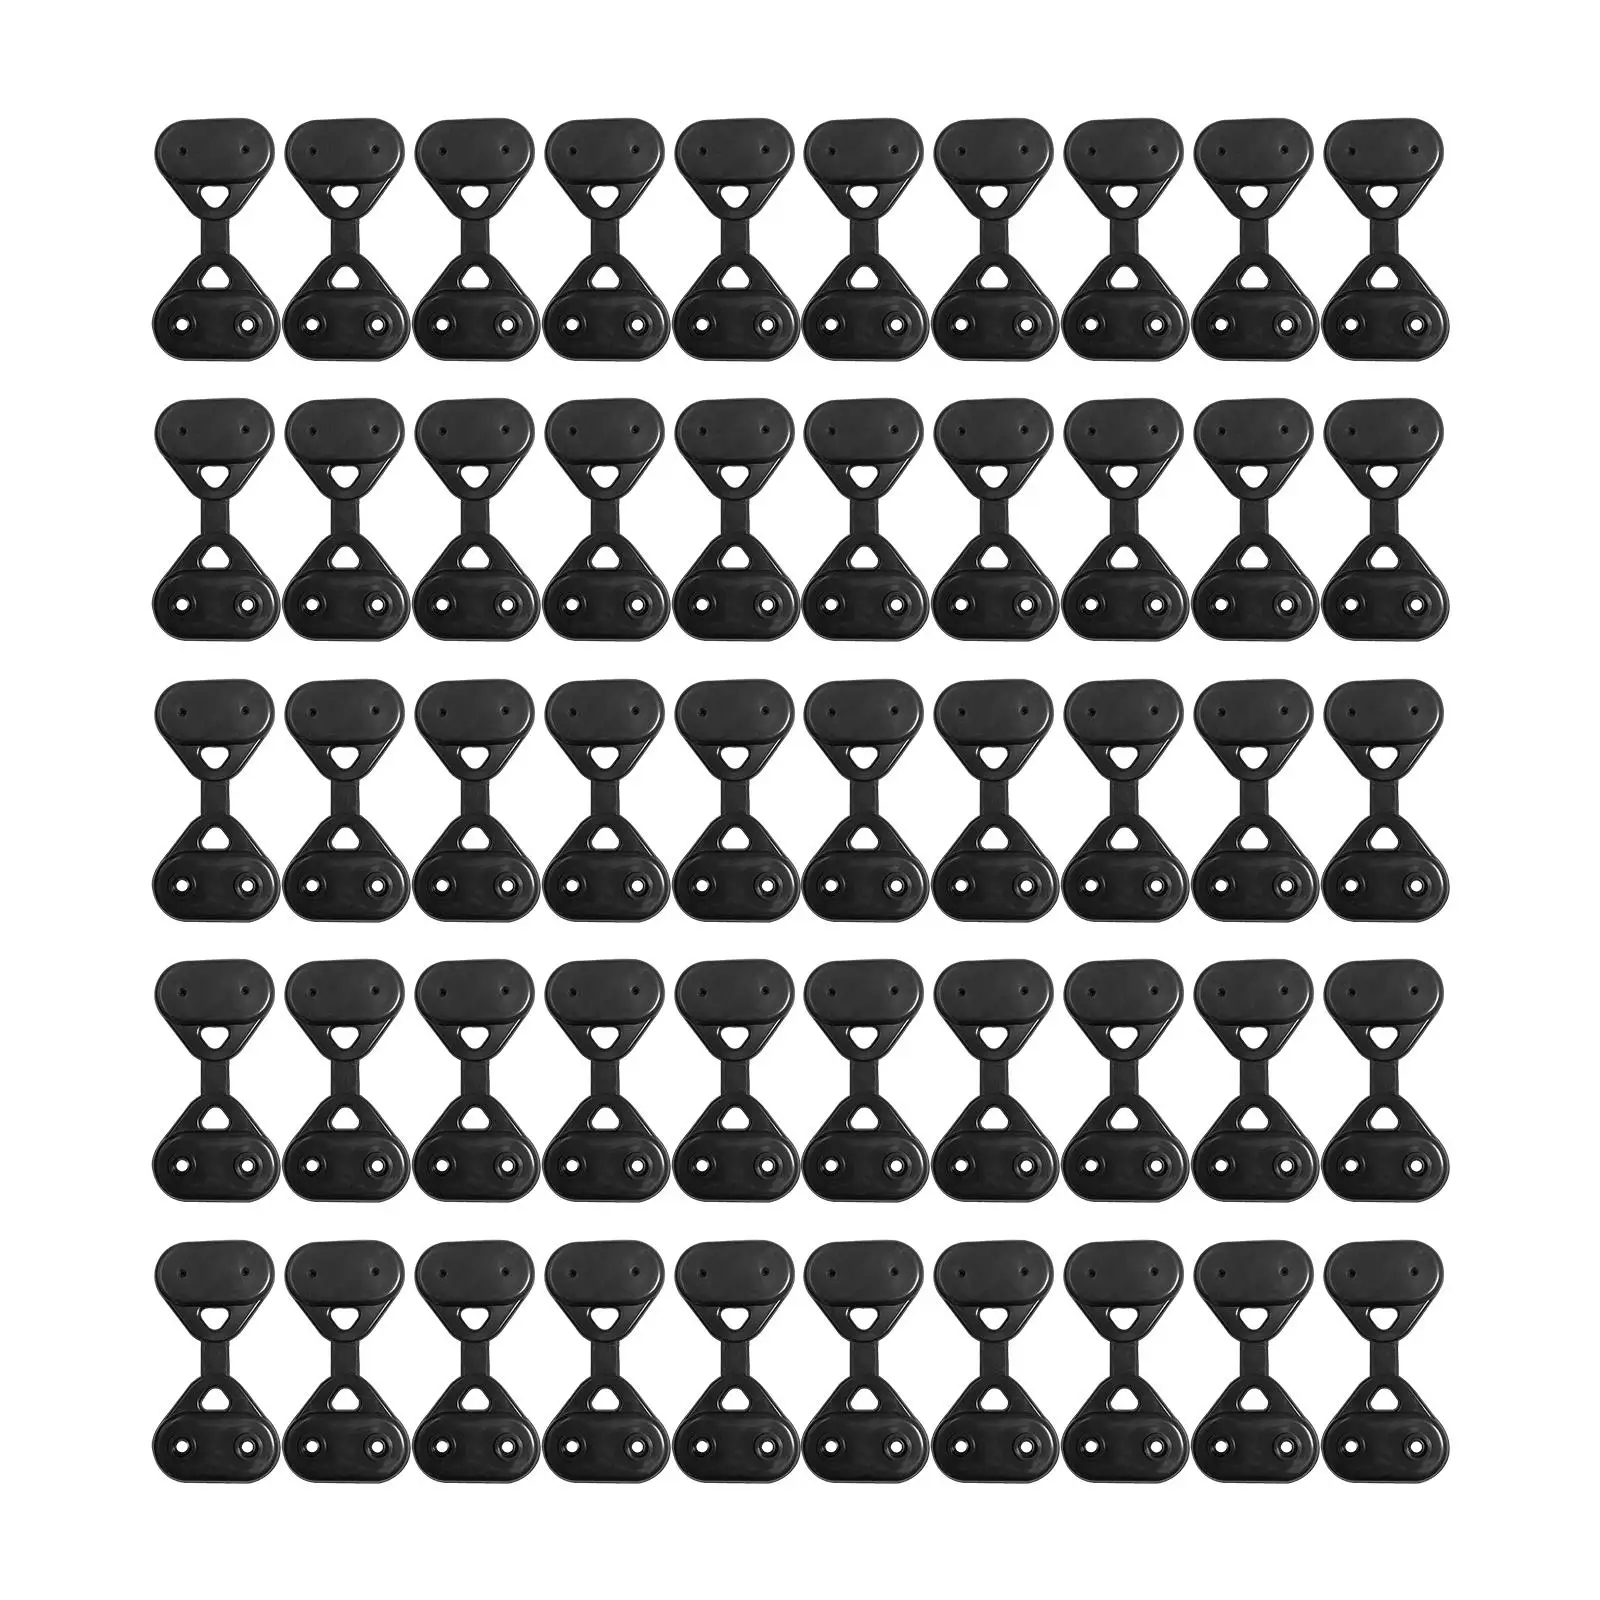 50Pcs Shade Cloth Clips Lock Grips Shade Fabric Accessories Shade Net Clips for Anti Bird Net Car Cover Patio Greenhouse Garden